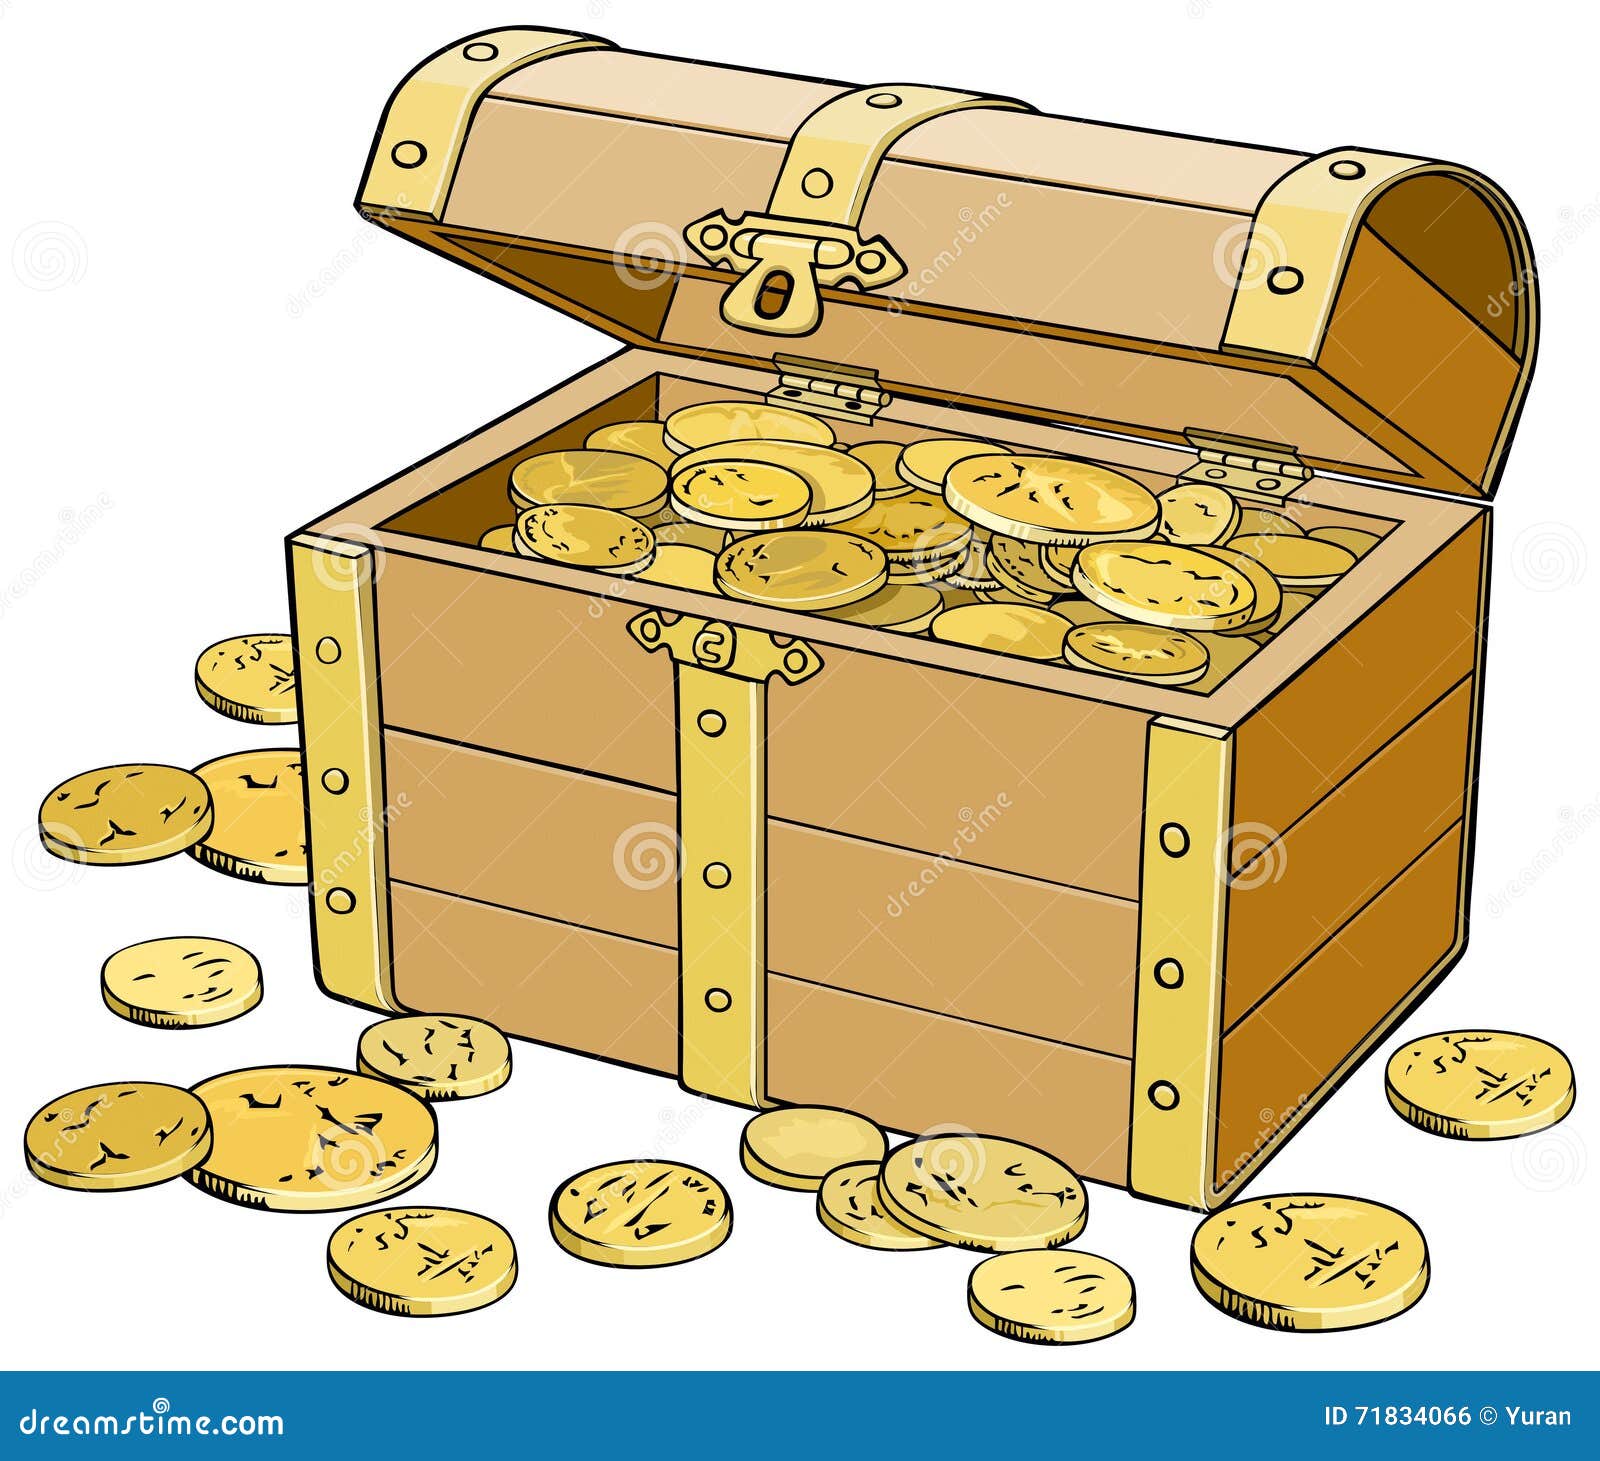 Treasure chest stock vector. Illustration of container - 71834066